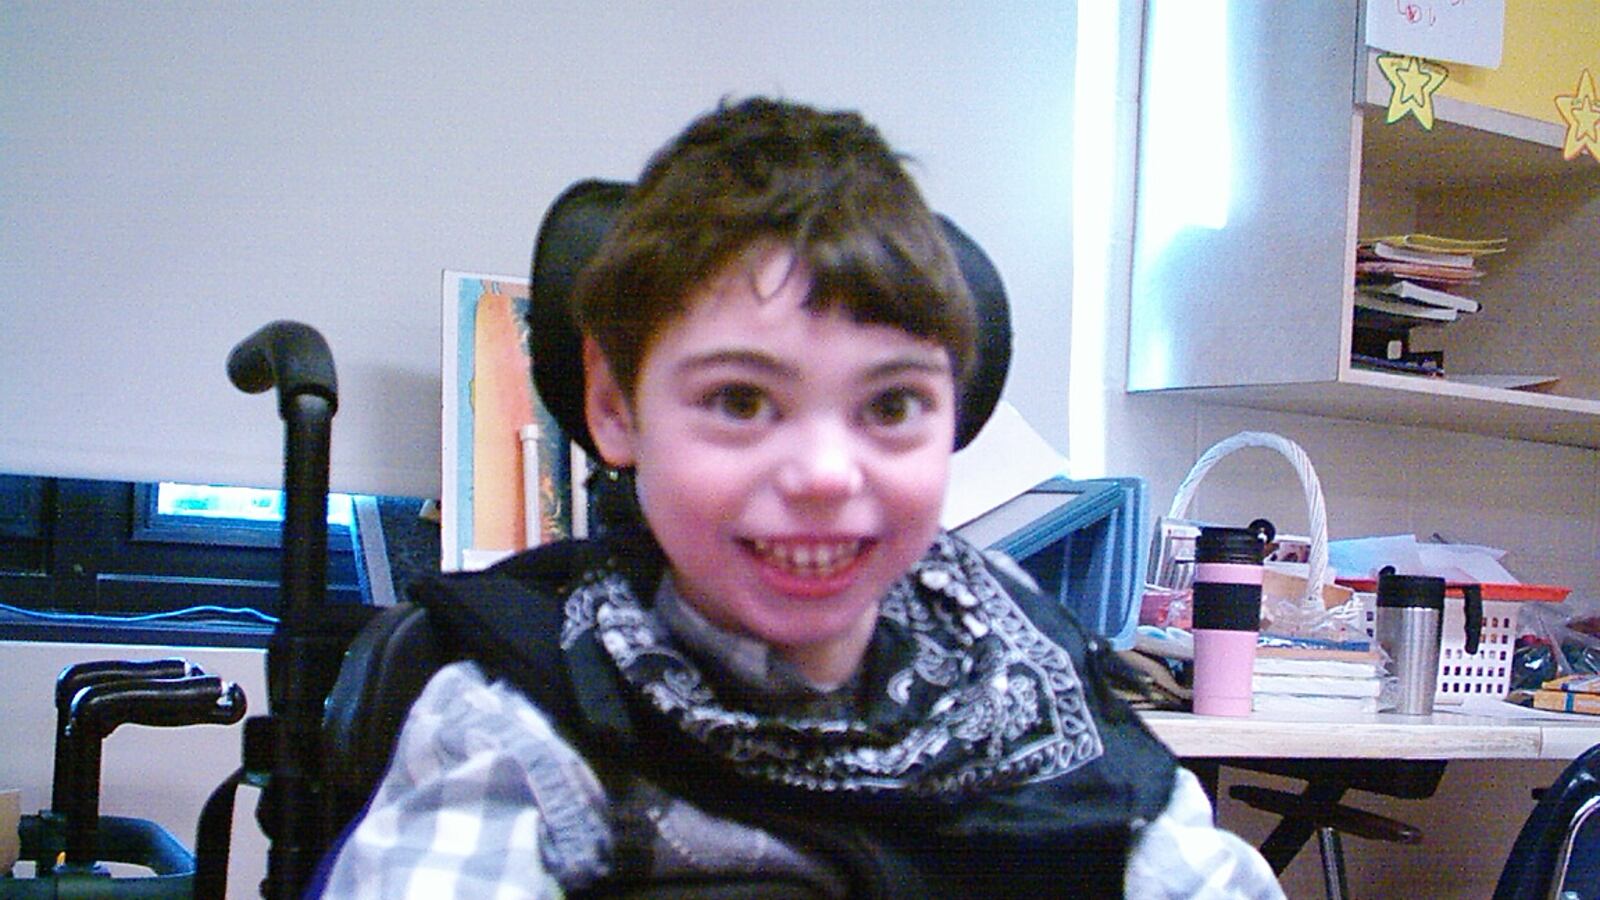 A little boy with brown hair smiles. He sits in a Black wheelchair. He is wearing a gray and white shirt.